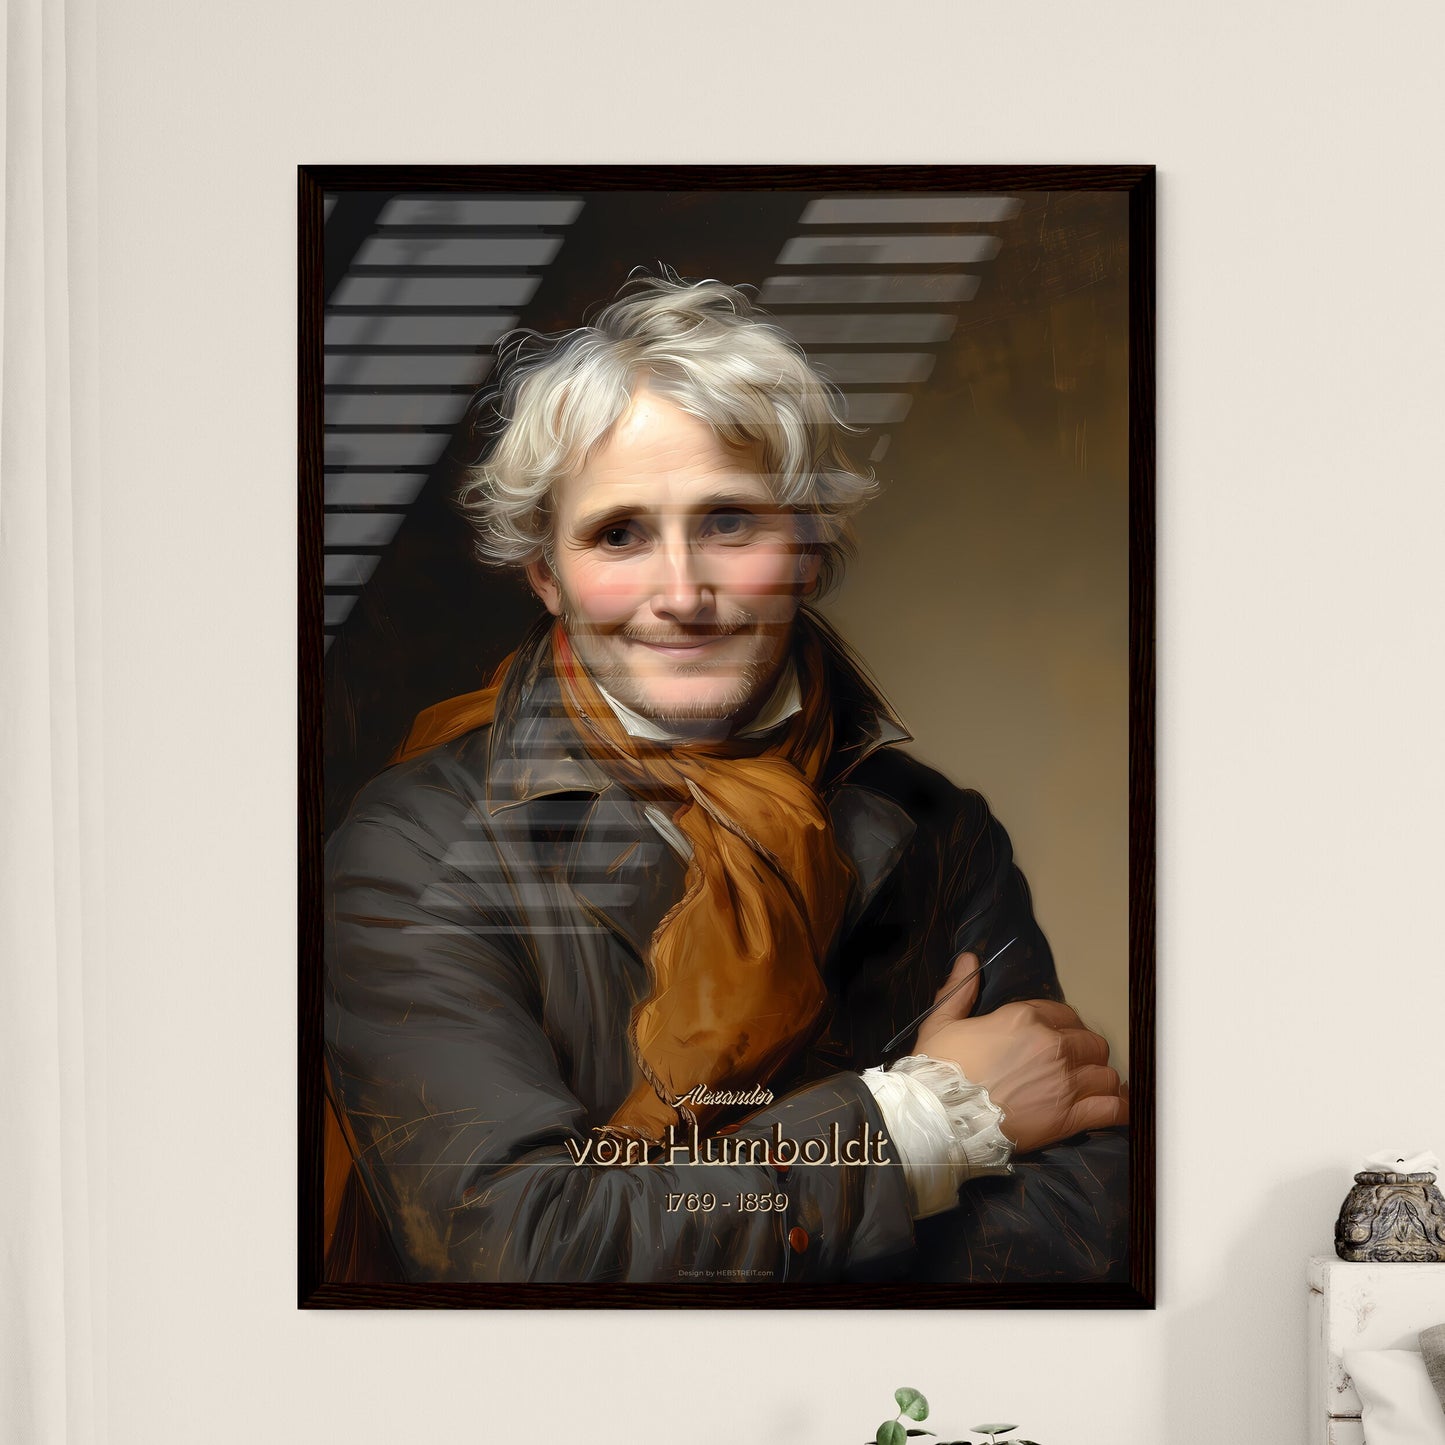 Alexander, von Humboldt, 1769 - 1859, A Poster of a man with white hair and a brown scarf Default Title